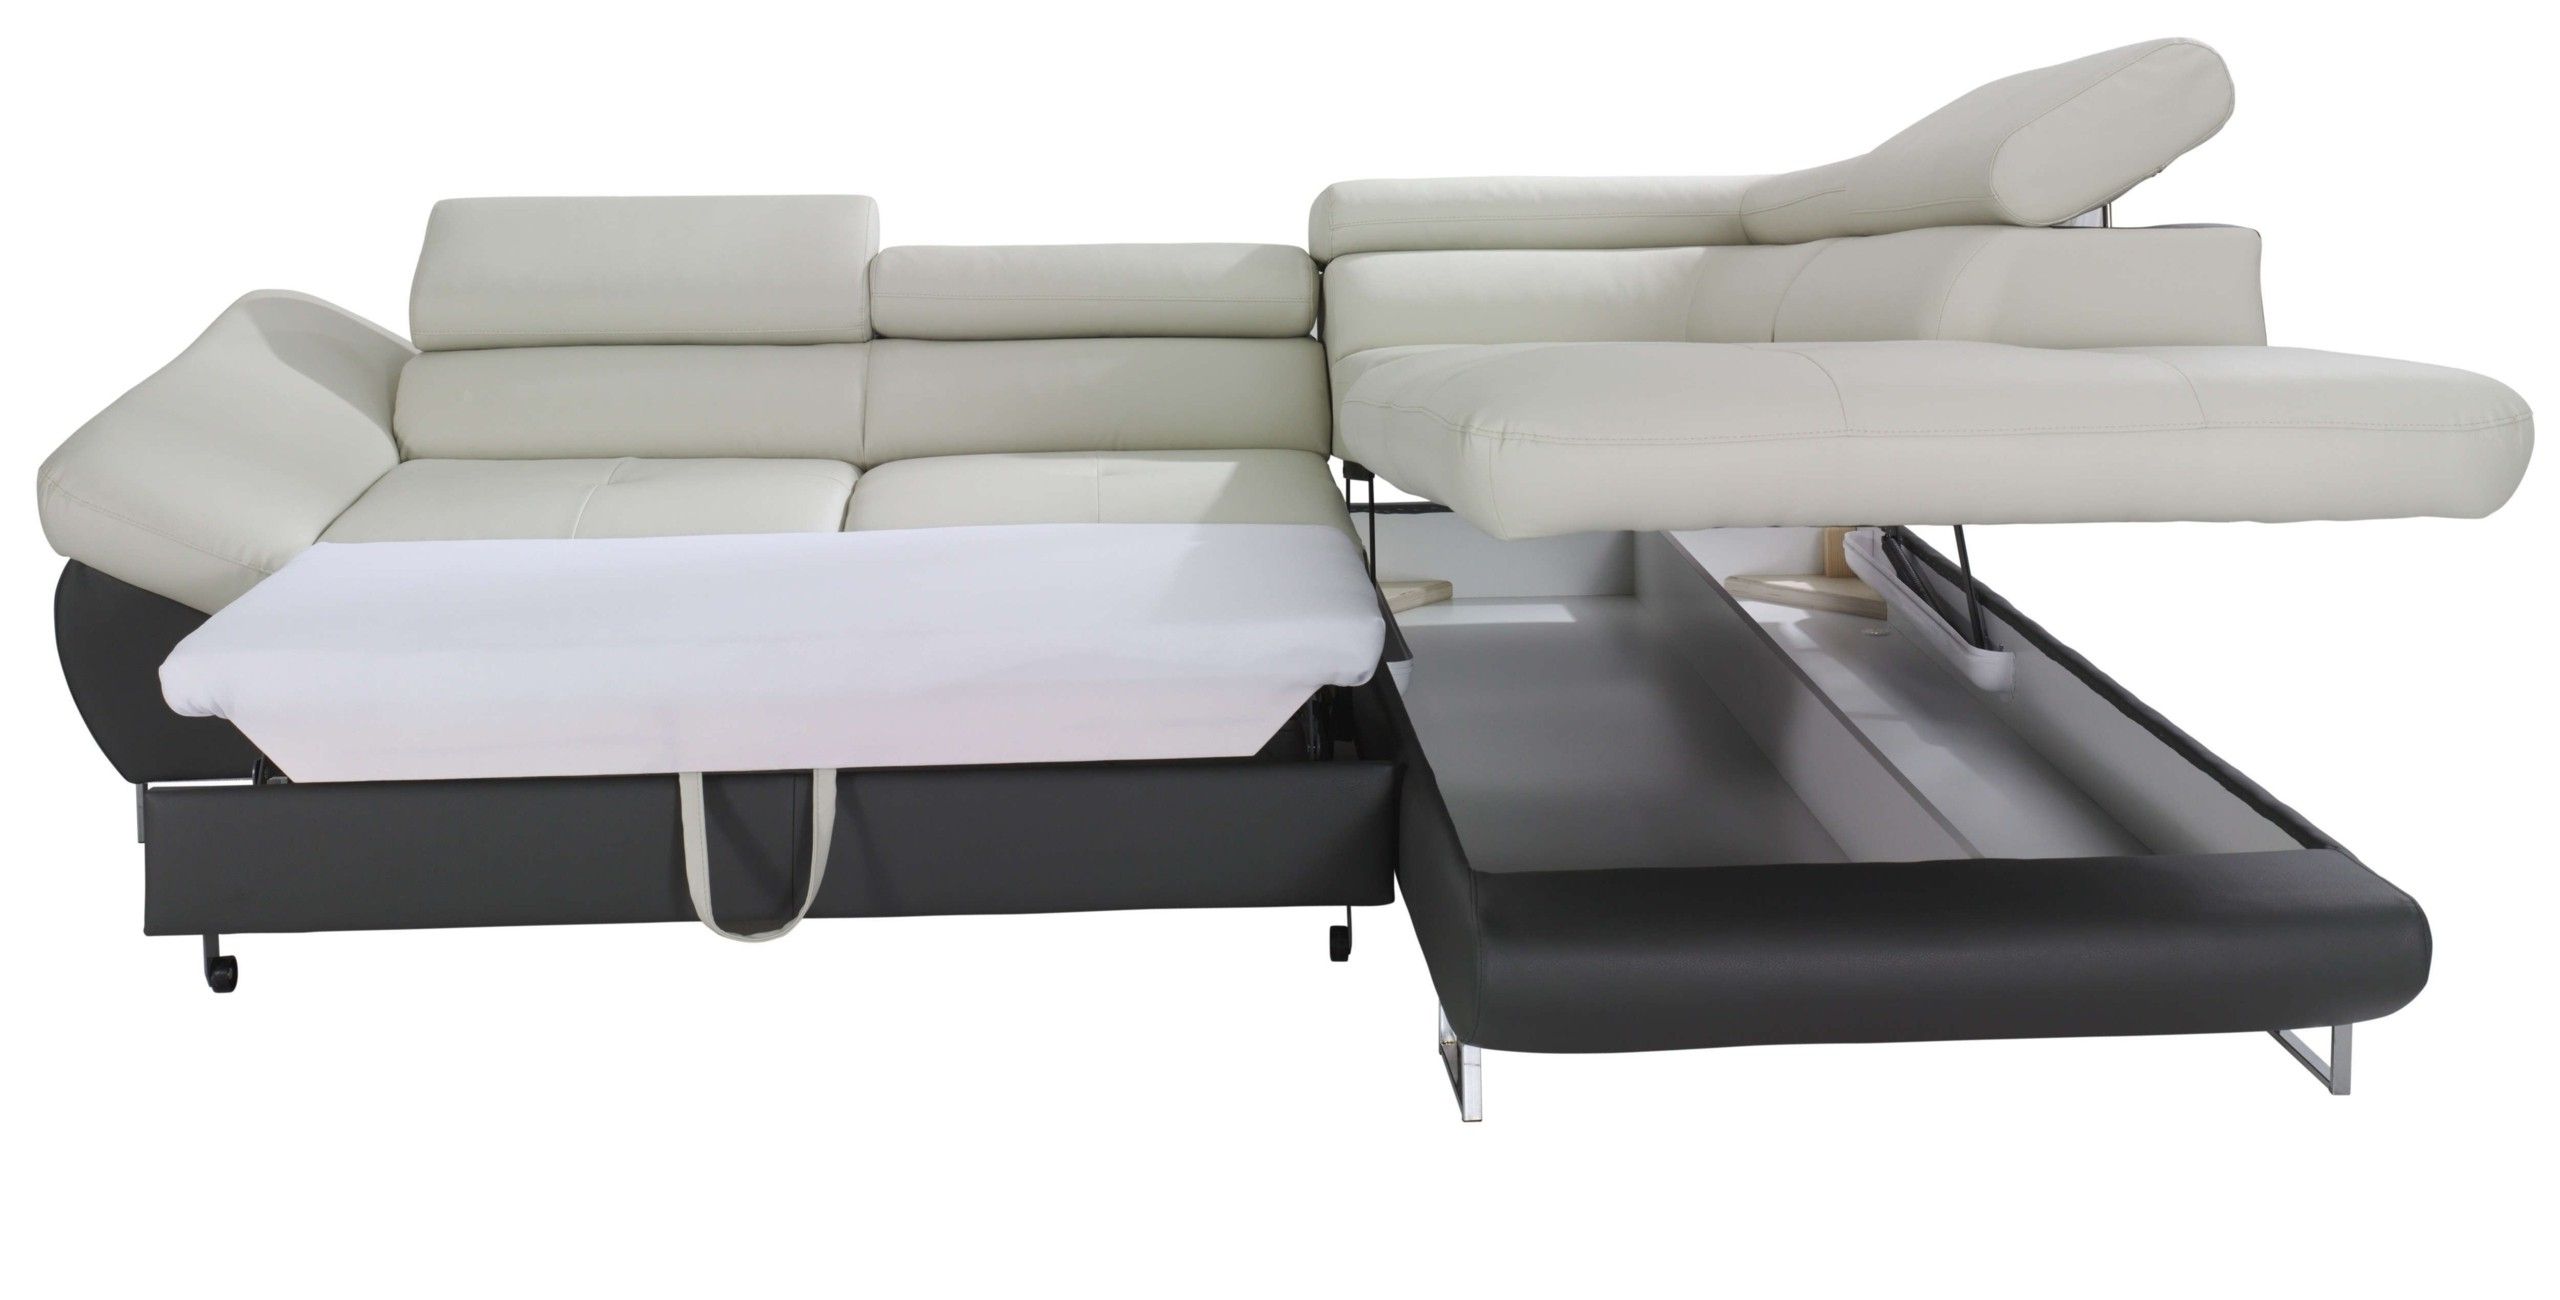 Sectional Sofas With Storage – Ideas On Foter Throughout Sofa Sectionals With Storage (View 6 of 20)